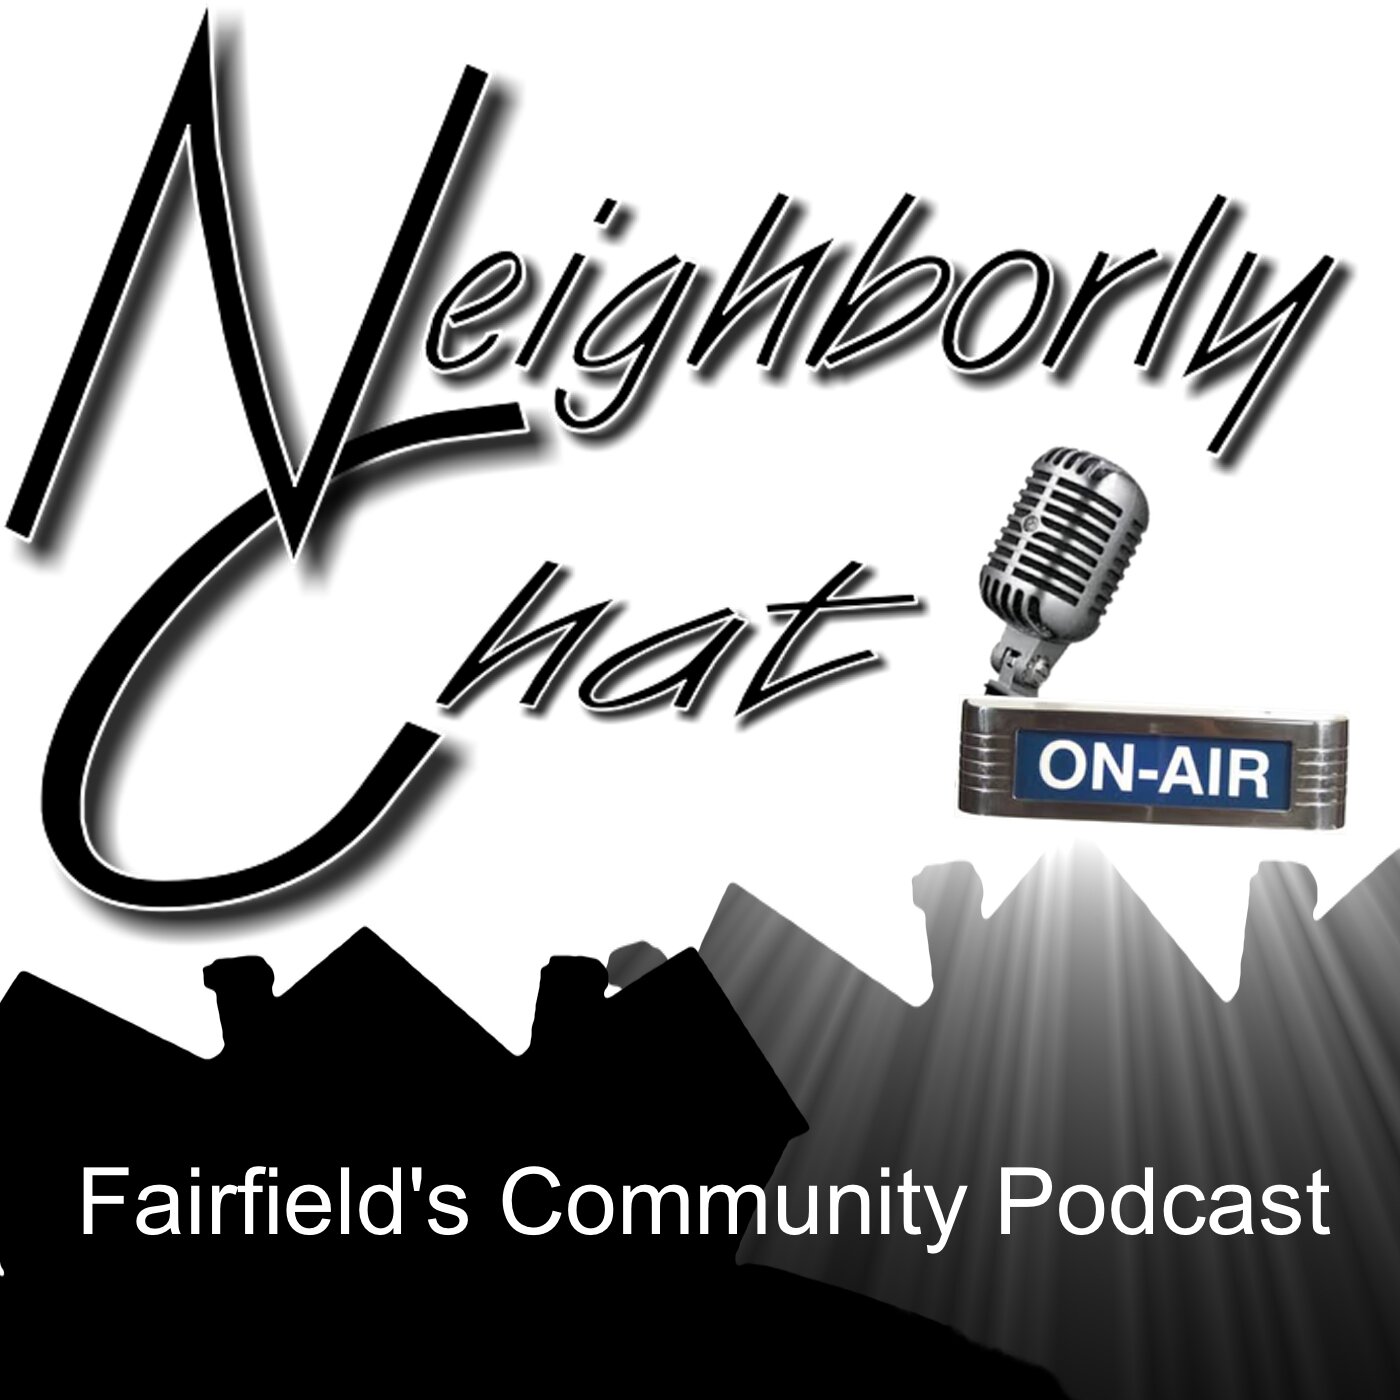 Fairfield's Community Podcast. It's all about the people who live in the greatest community on earth, ours.